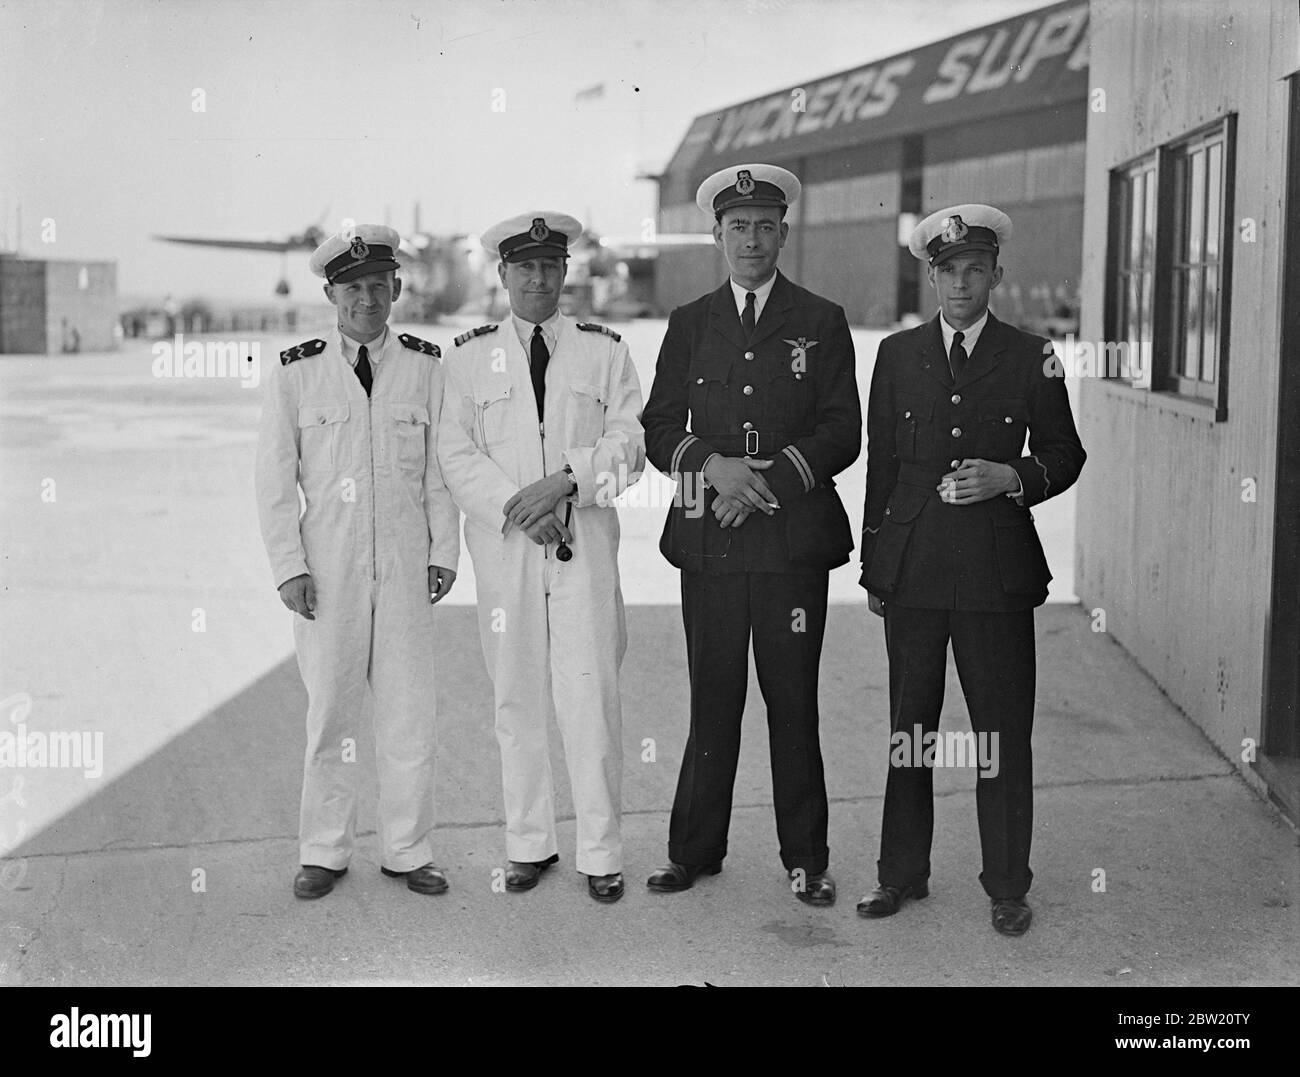 'Caledonia' crew for first experimental transatlantic flight. Captain A S Wilcockson, commander, and the crew of the giant Empire flying boat 'Caledonia'photographed at Southampton before leaving for the Shannon base in the Irish Free State from where the 'Caledonia'will take off on her first experimental transatlantic flight to Newfoundland and New York. Left to right, radio operator Hobbs, Captain A S Wilcockson, First Officer Bowes, and radio operator Lewis. 4 July 1937 Stock Photo